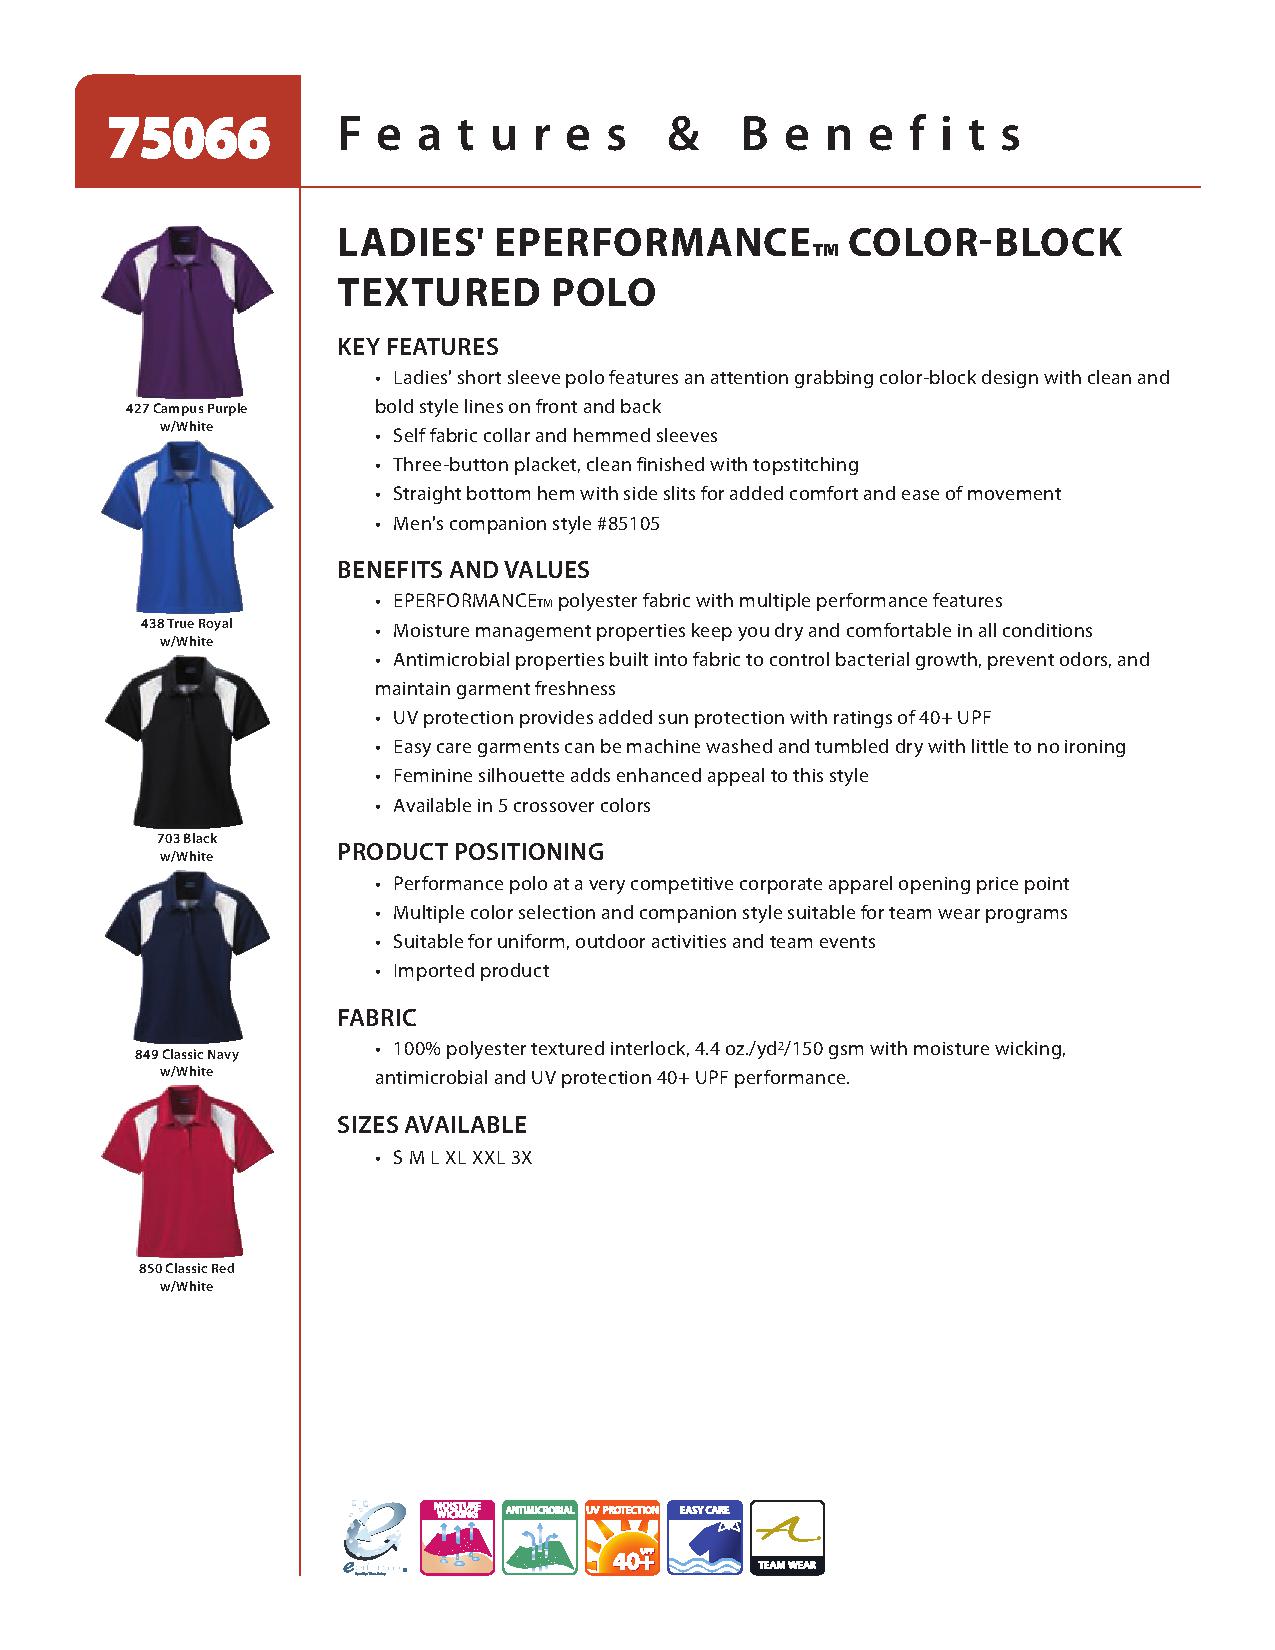 Ash City Eperformance 75066 - Ladies' Eperformance Color-Block Textured Polo